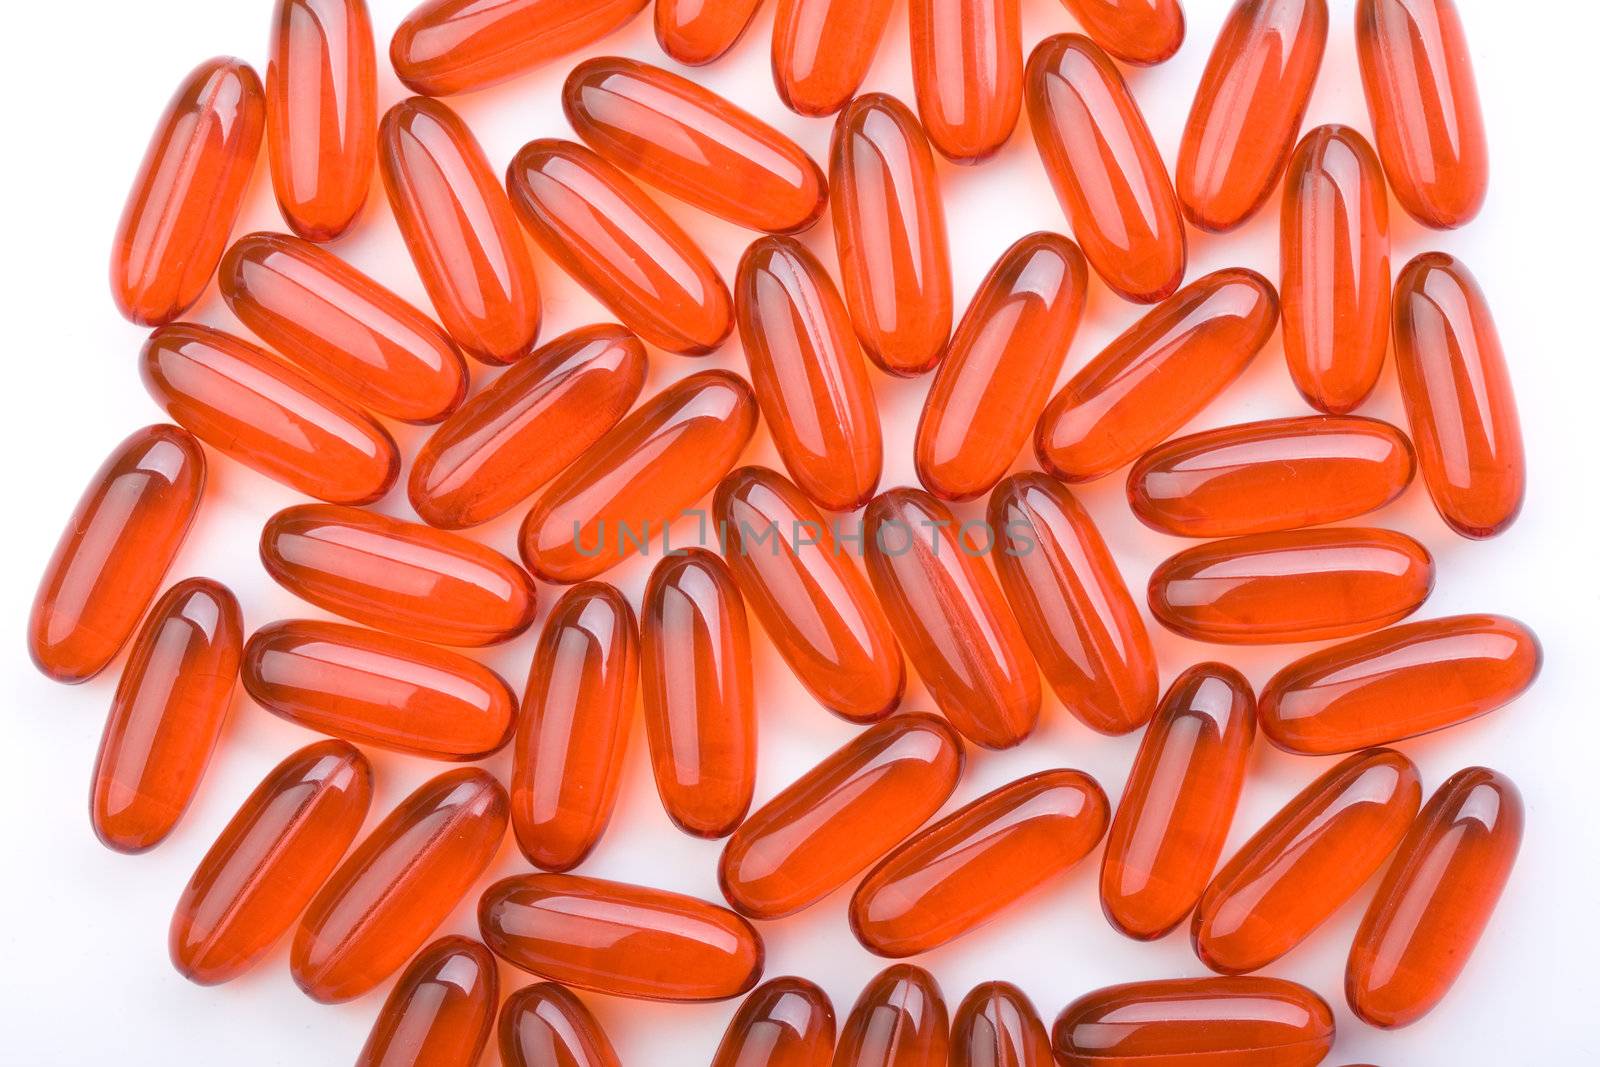 red tablets isolated on white background